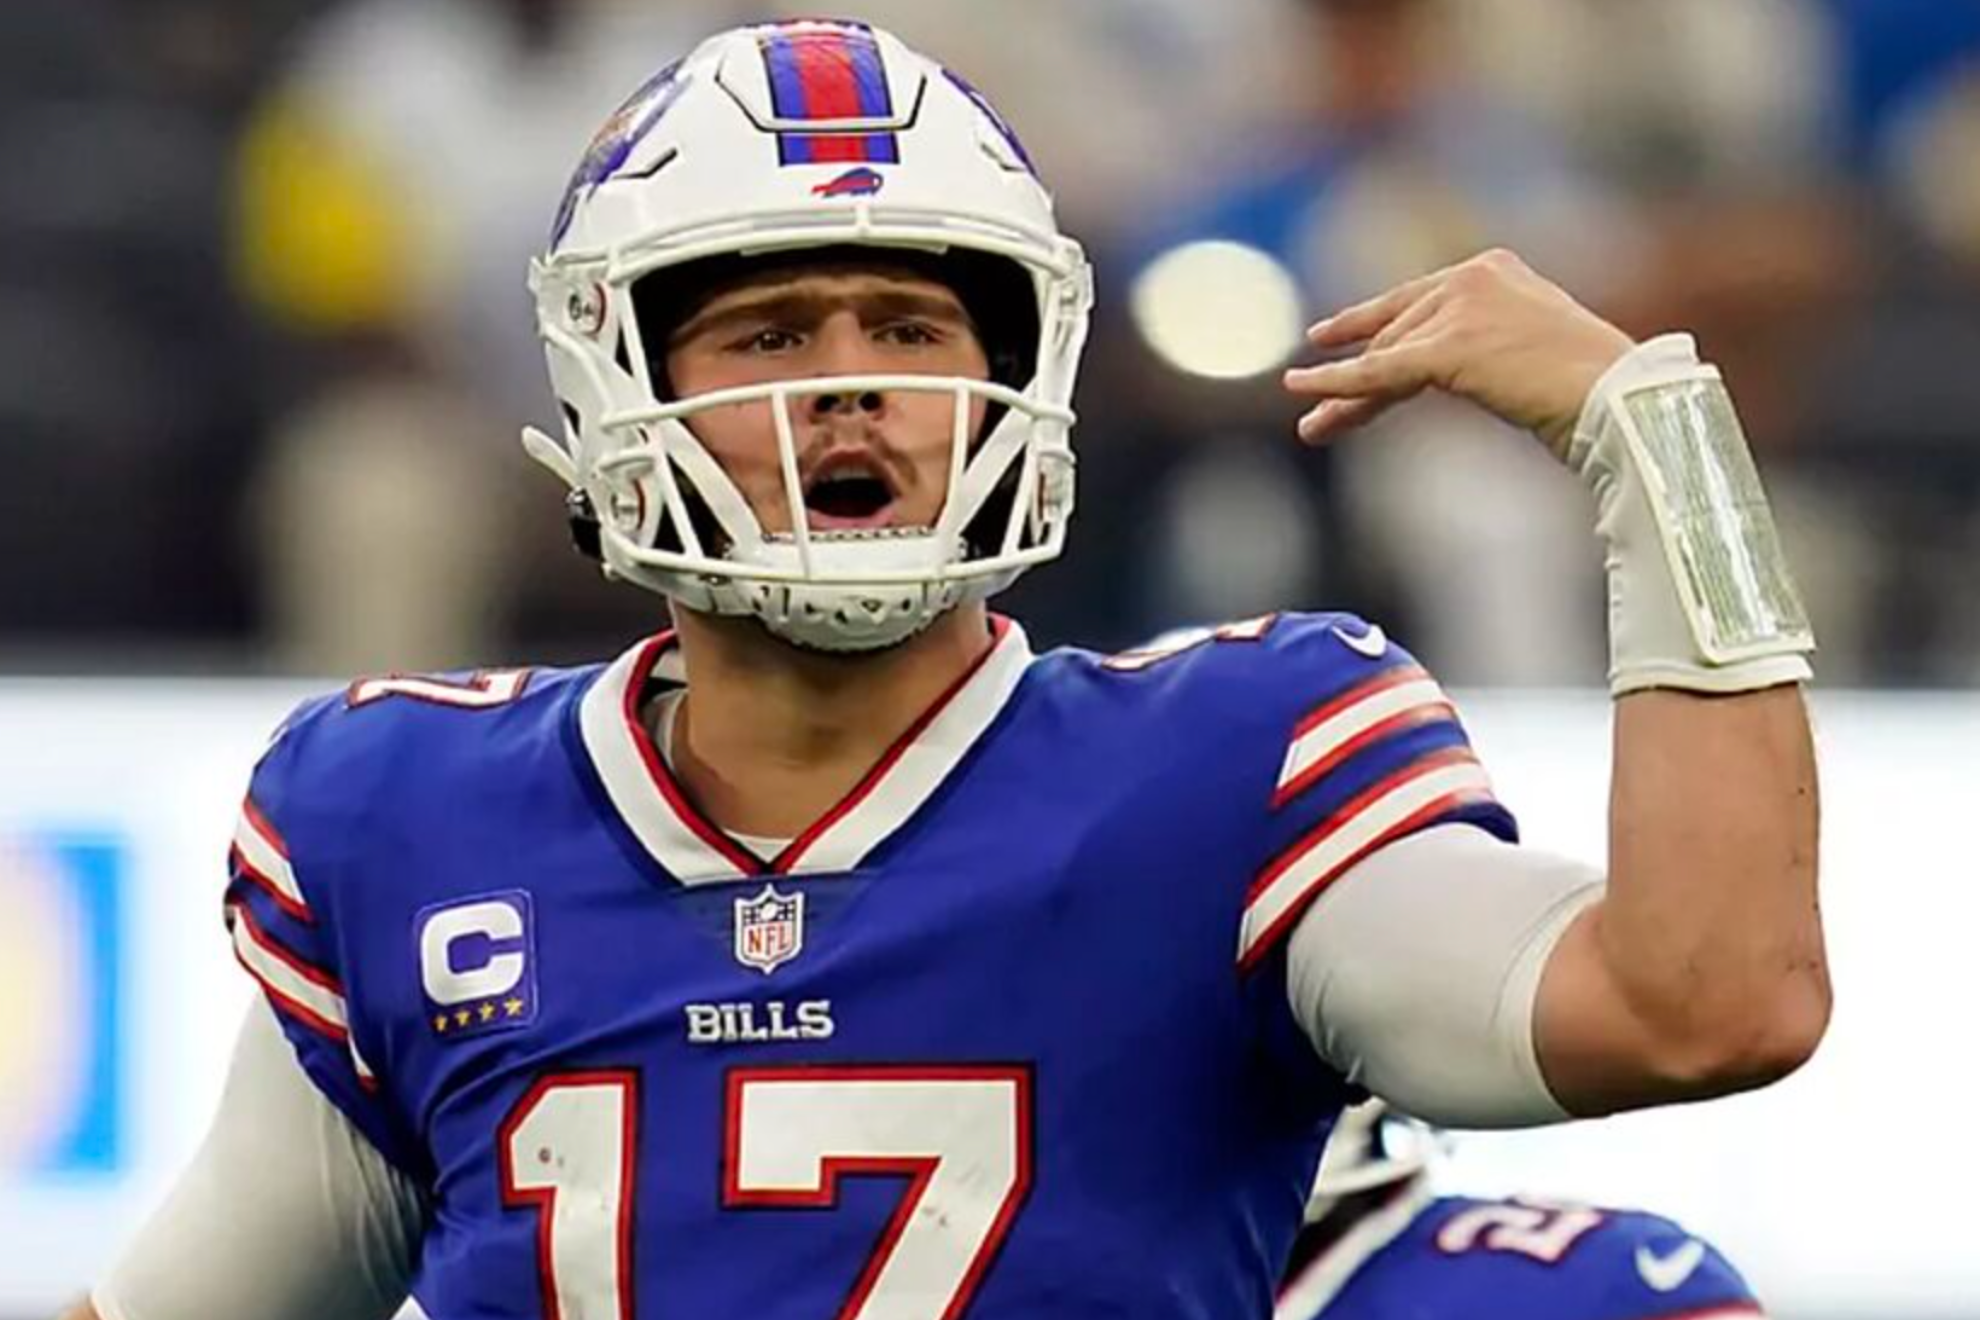 Josh Allen expressed frustration during interview: I want to be playing in the Super Bowl